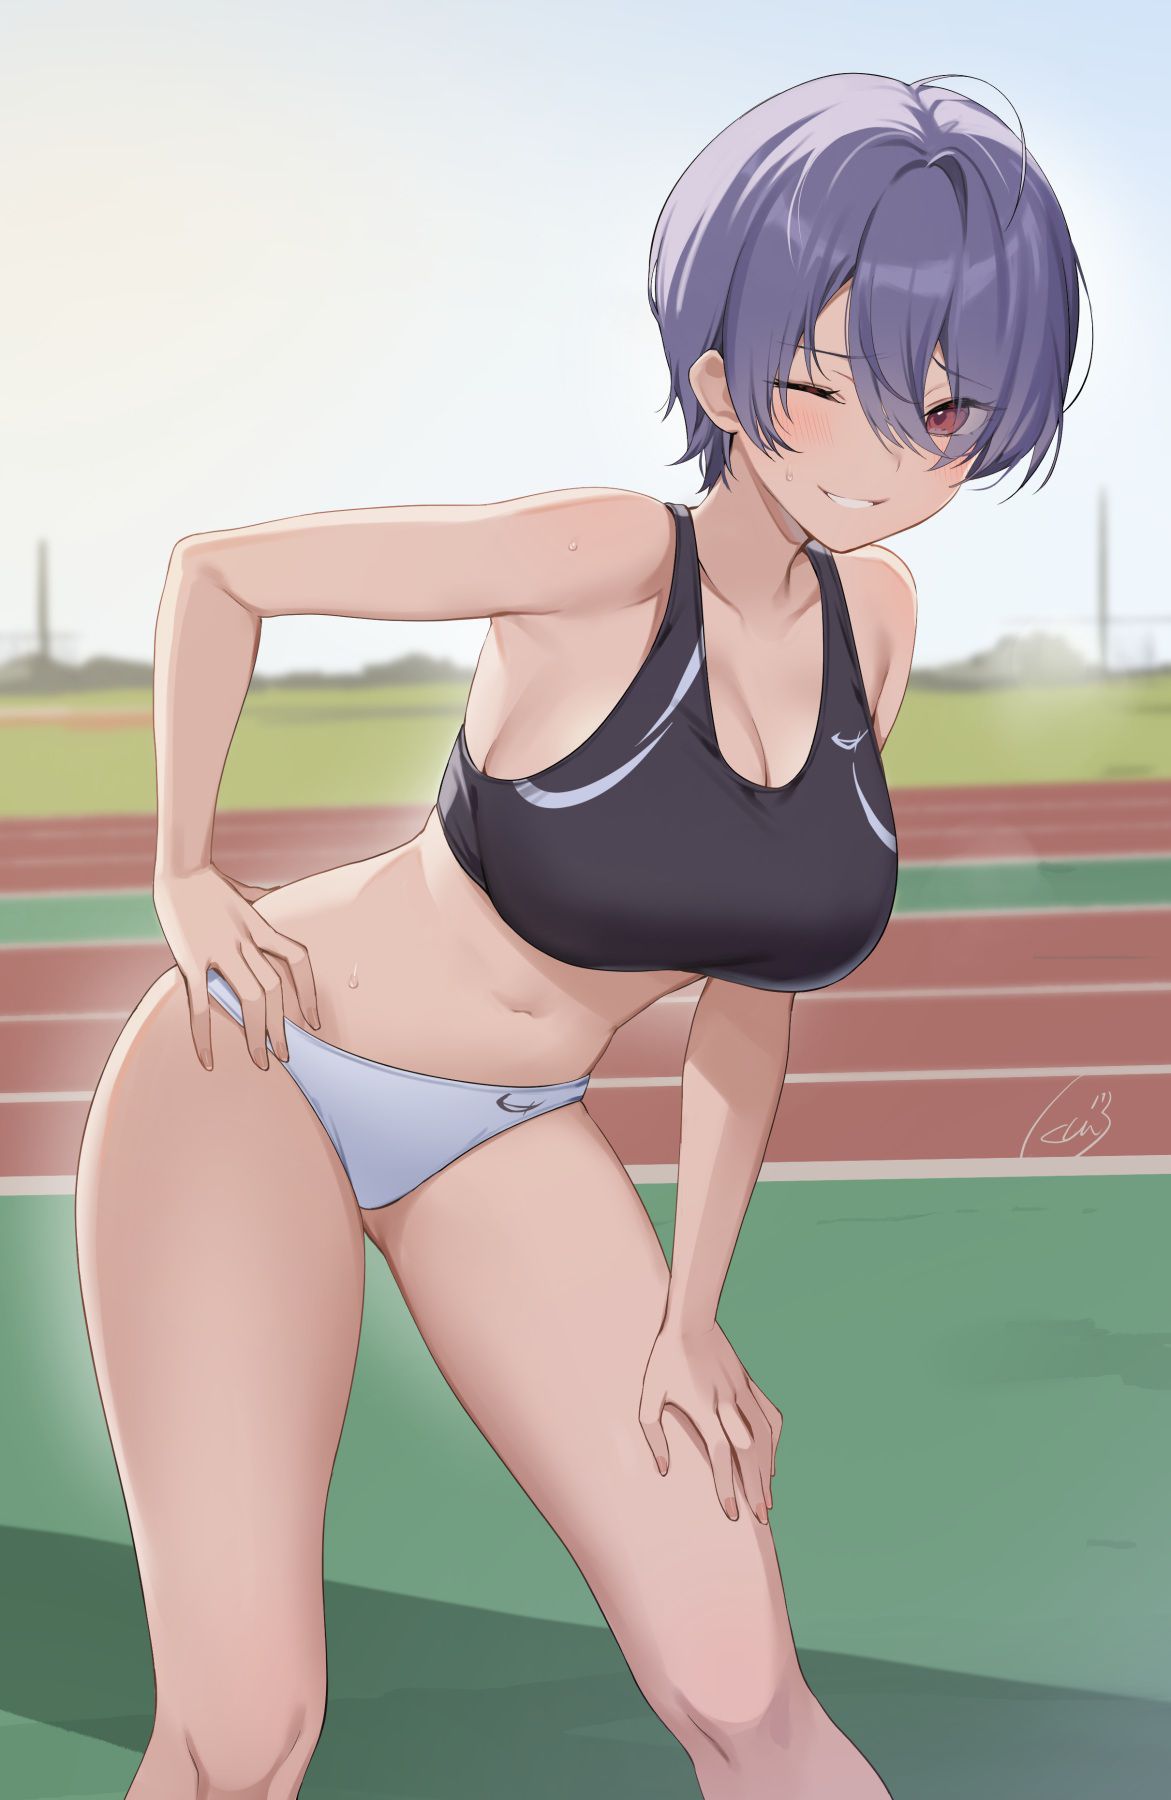 【2nd】Erotic image of a girl in sportswear Part 8 4